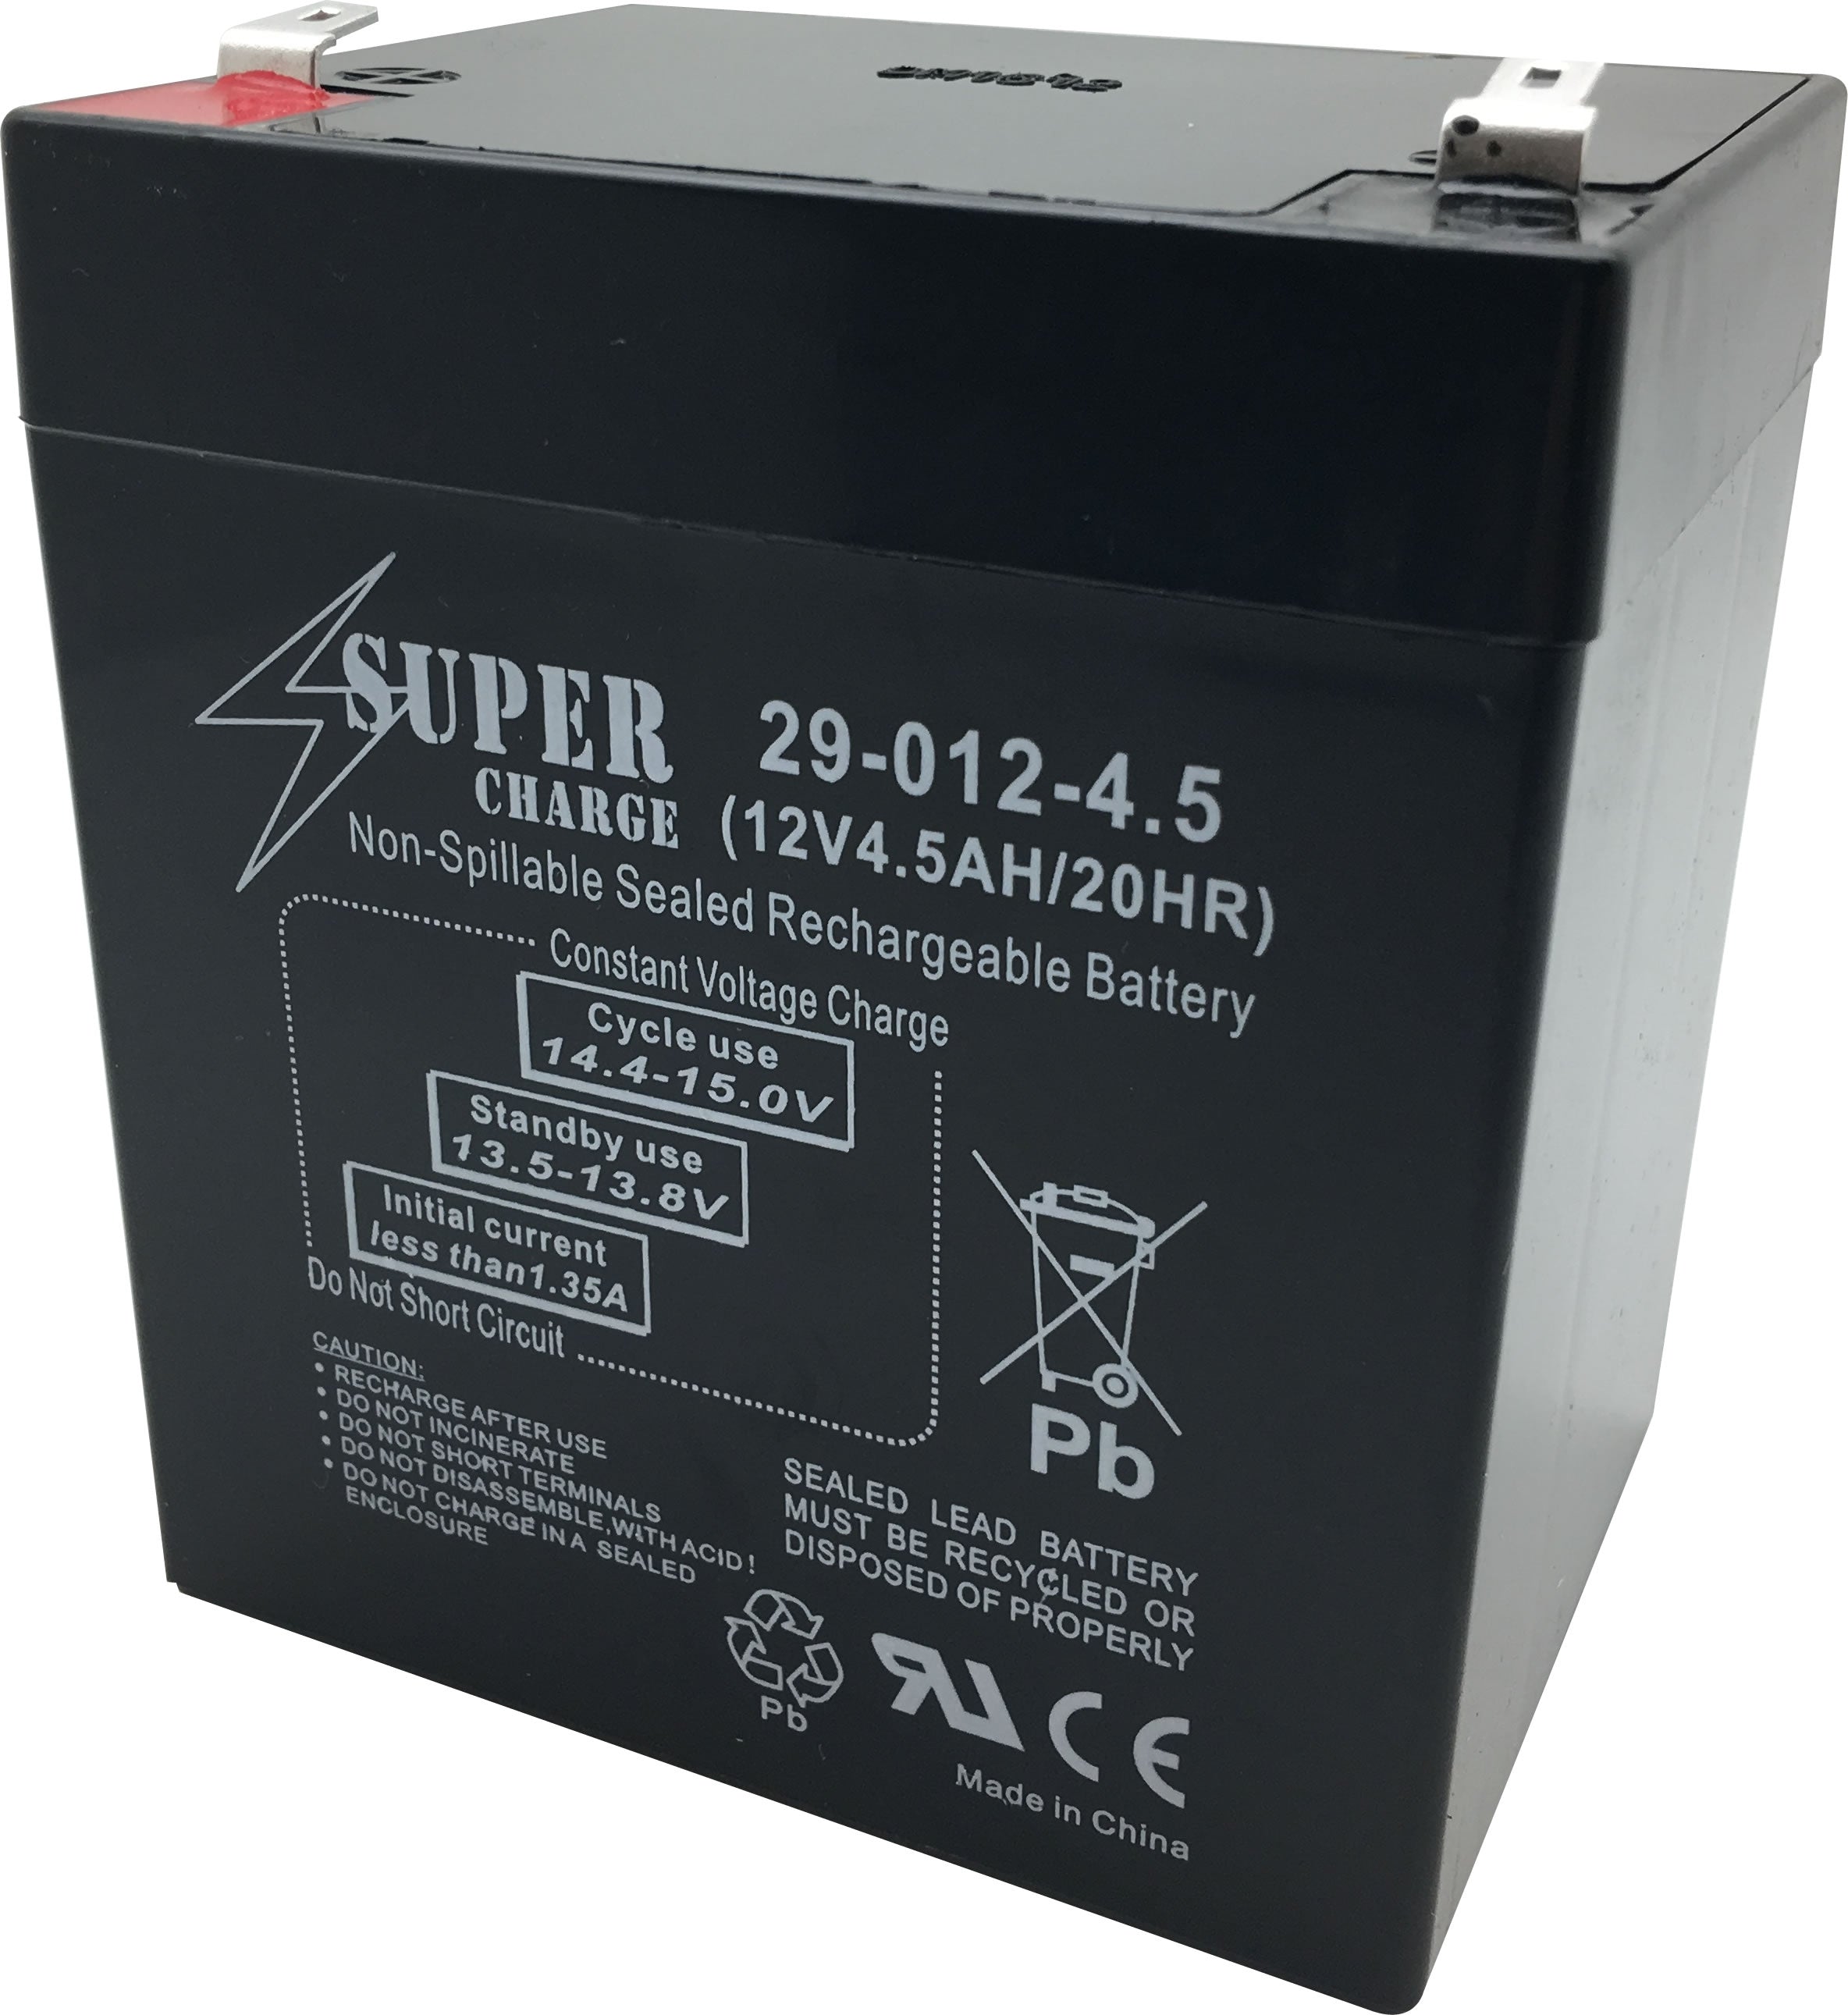 29-012-4.5 Rechargeable Battery 12V 4.5AH 20HR